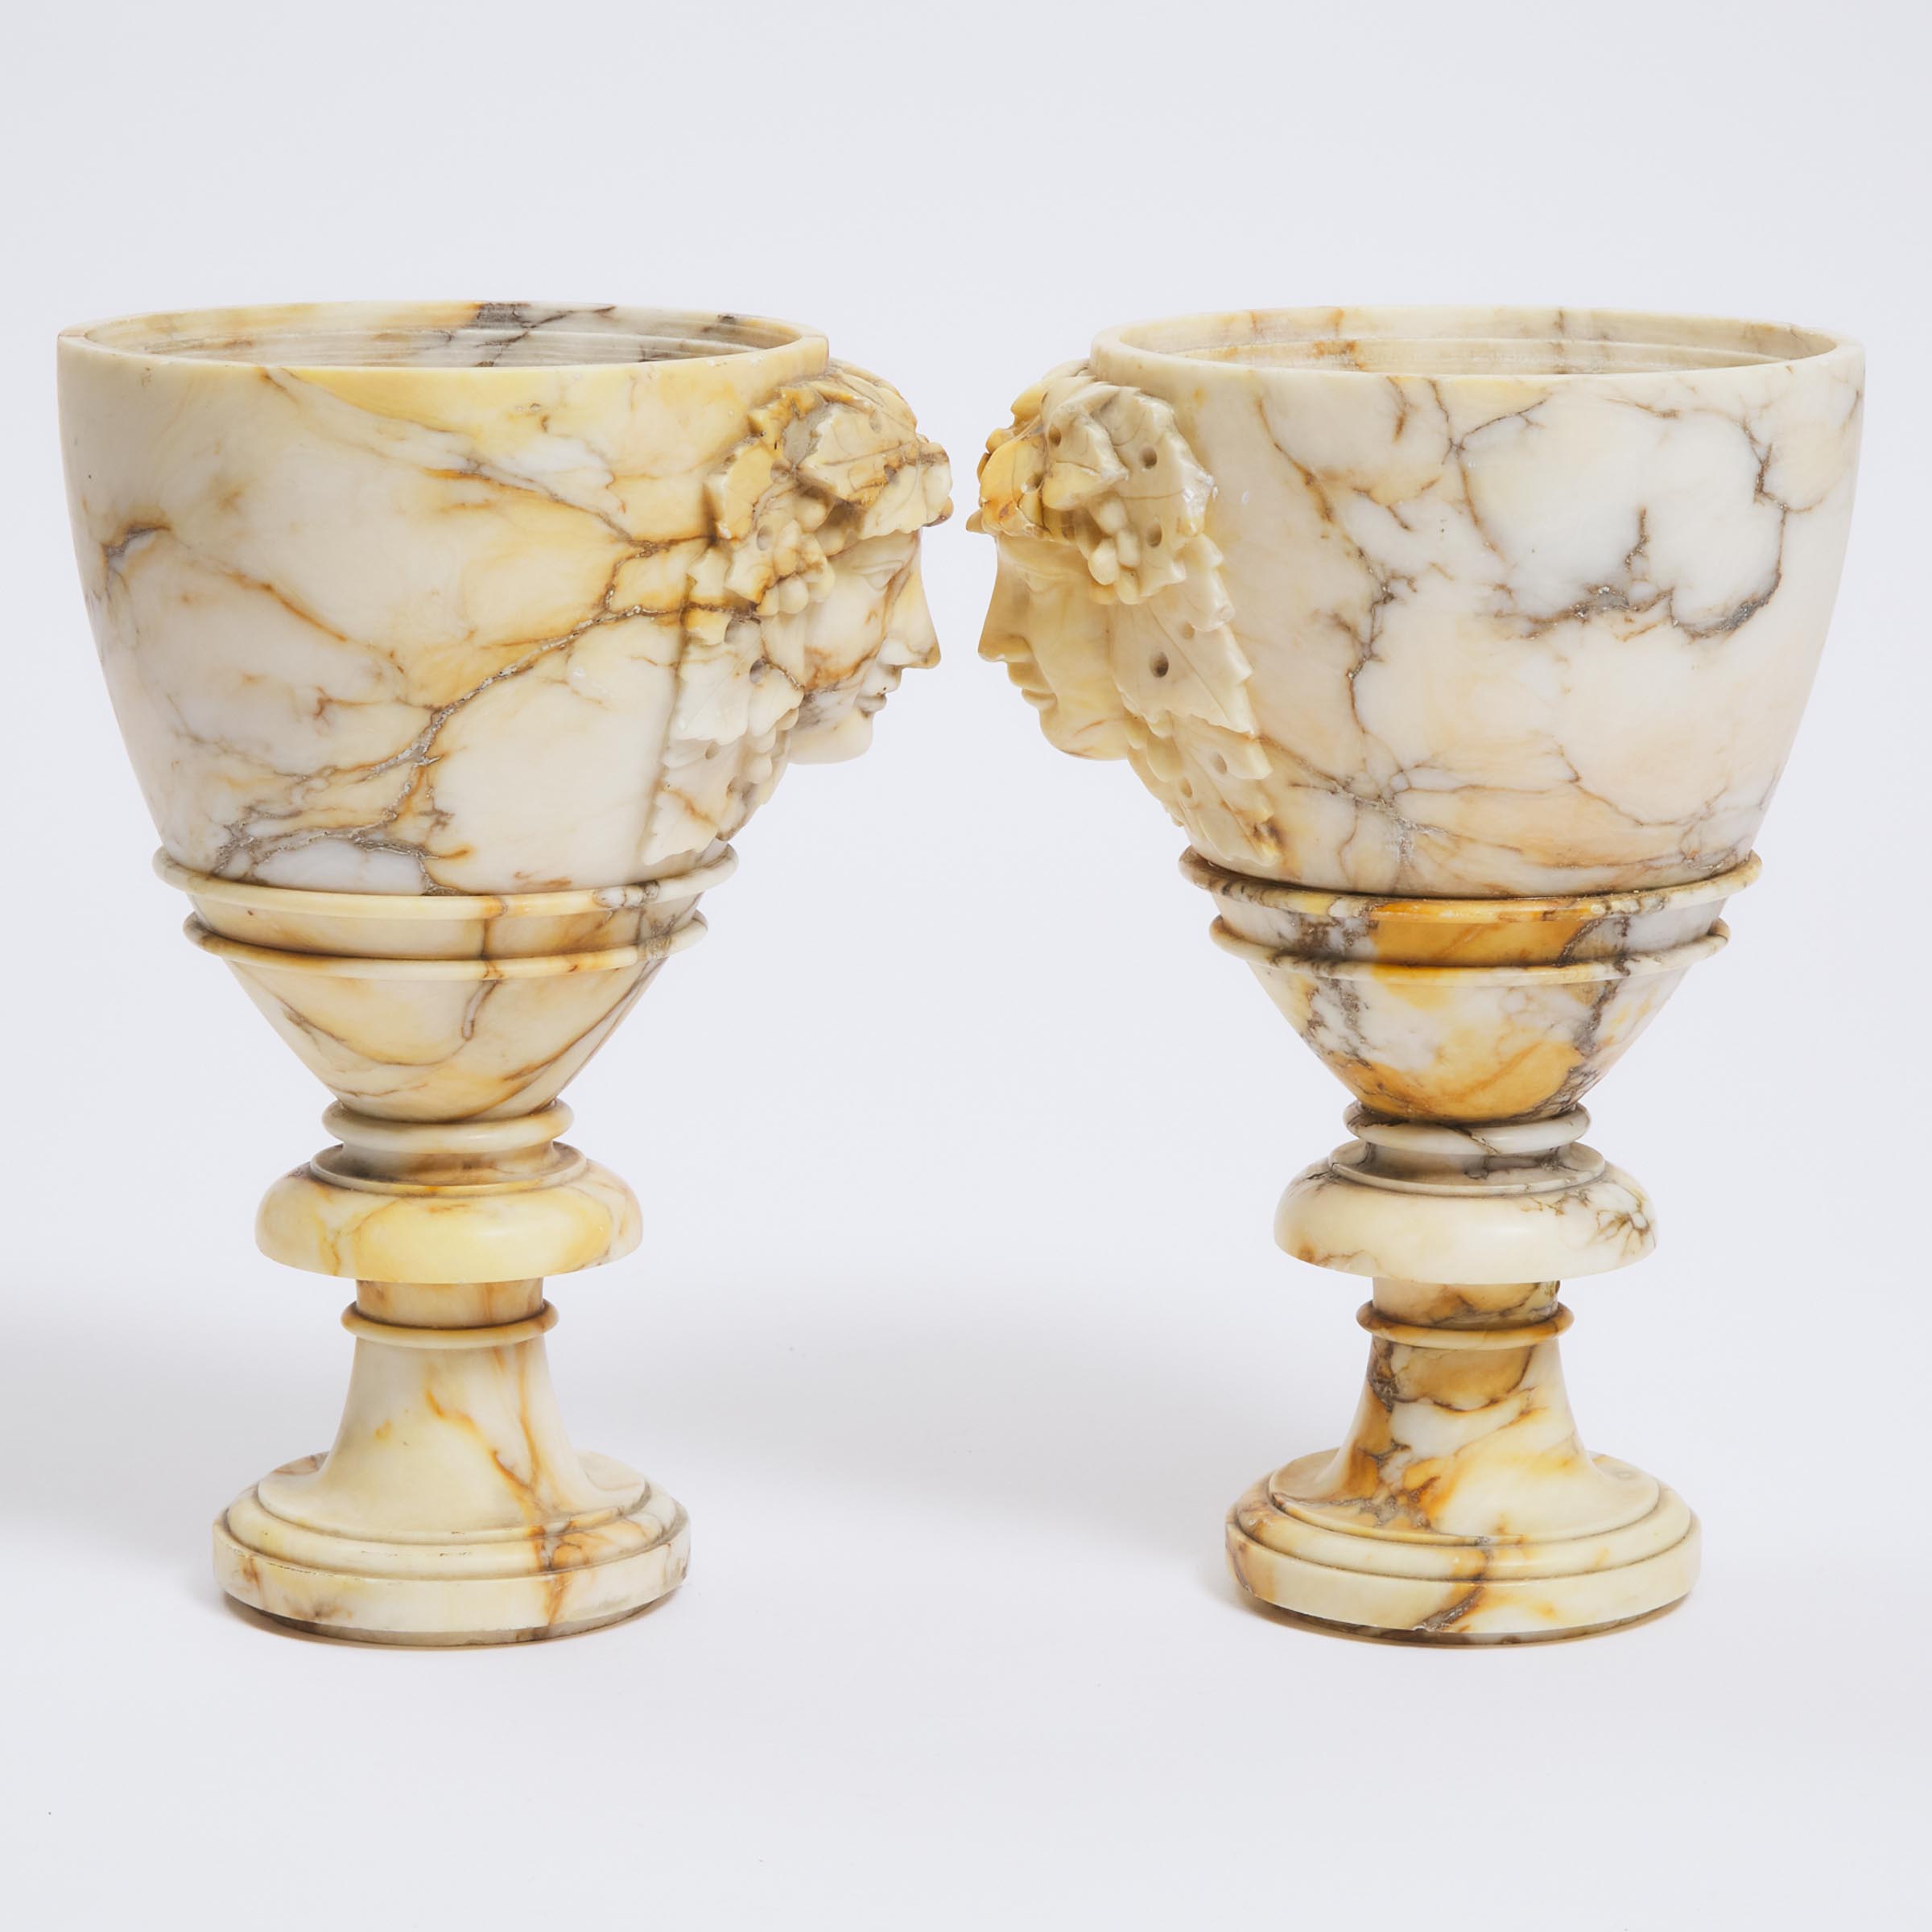 Pair of Italian Turned and Carved Alabaster Bacchanalian Cups, 19th century